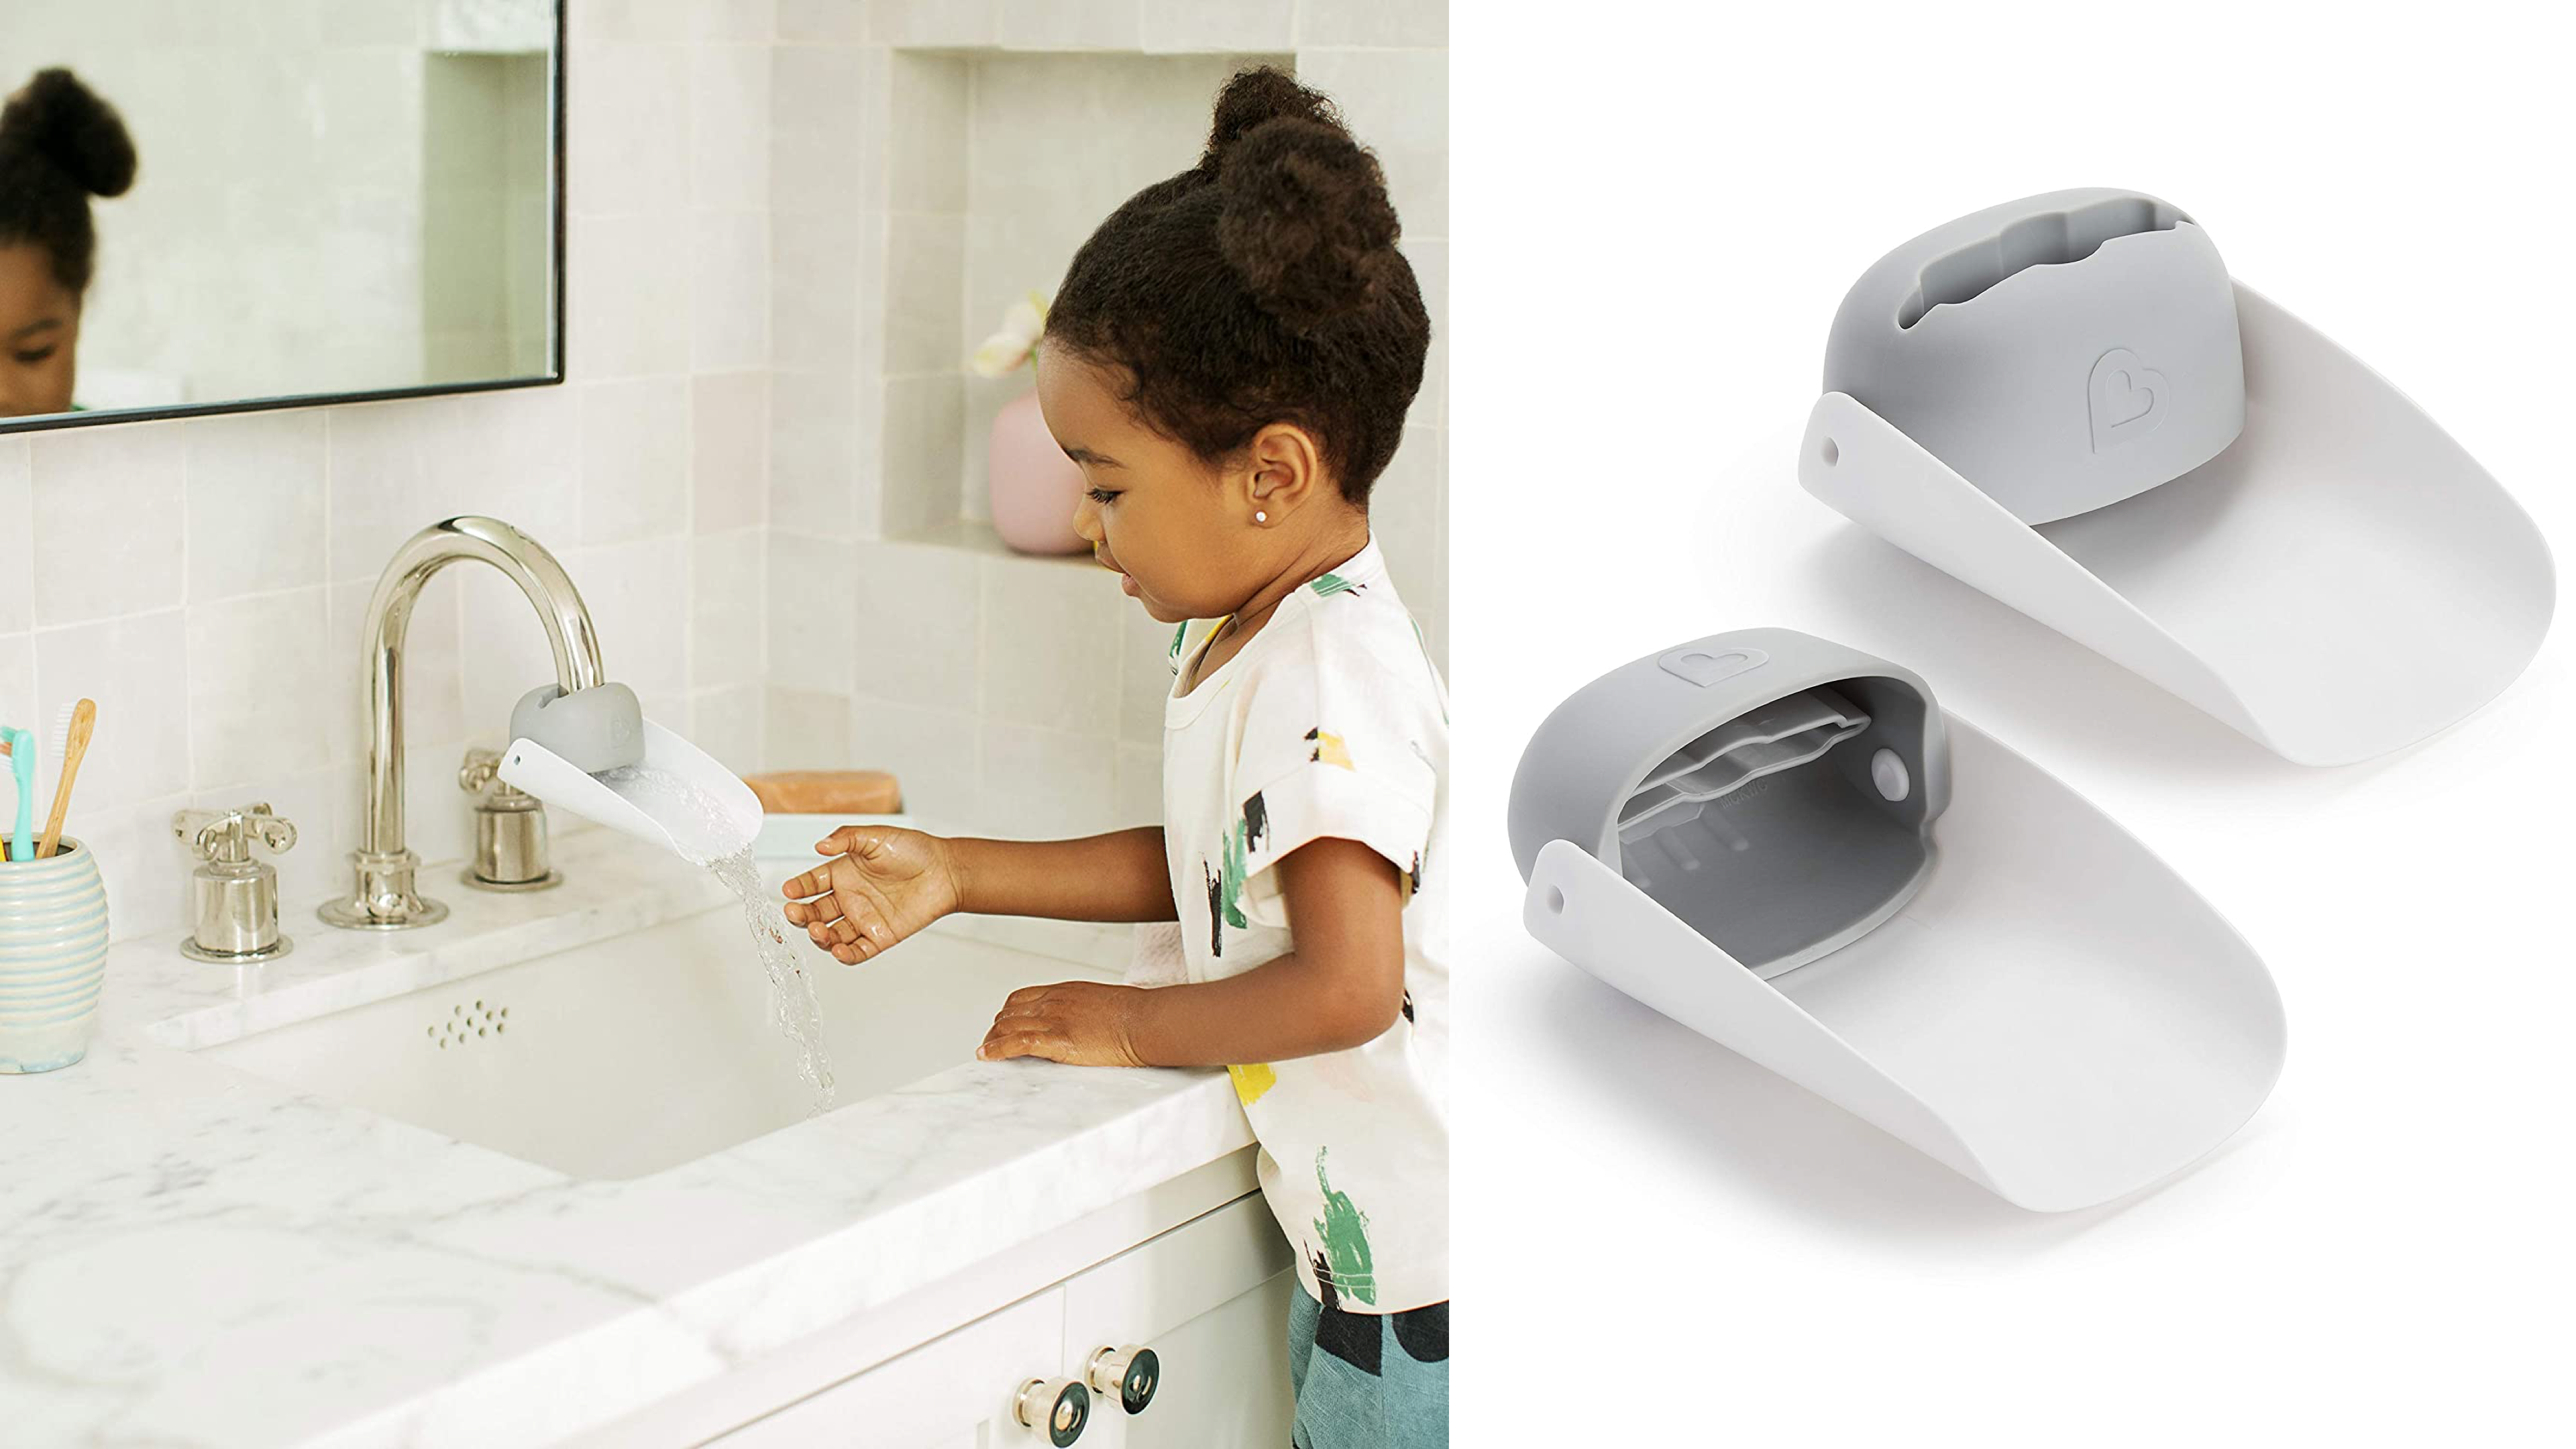 faucet extenders so your kids can reach the stream of water